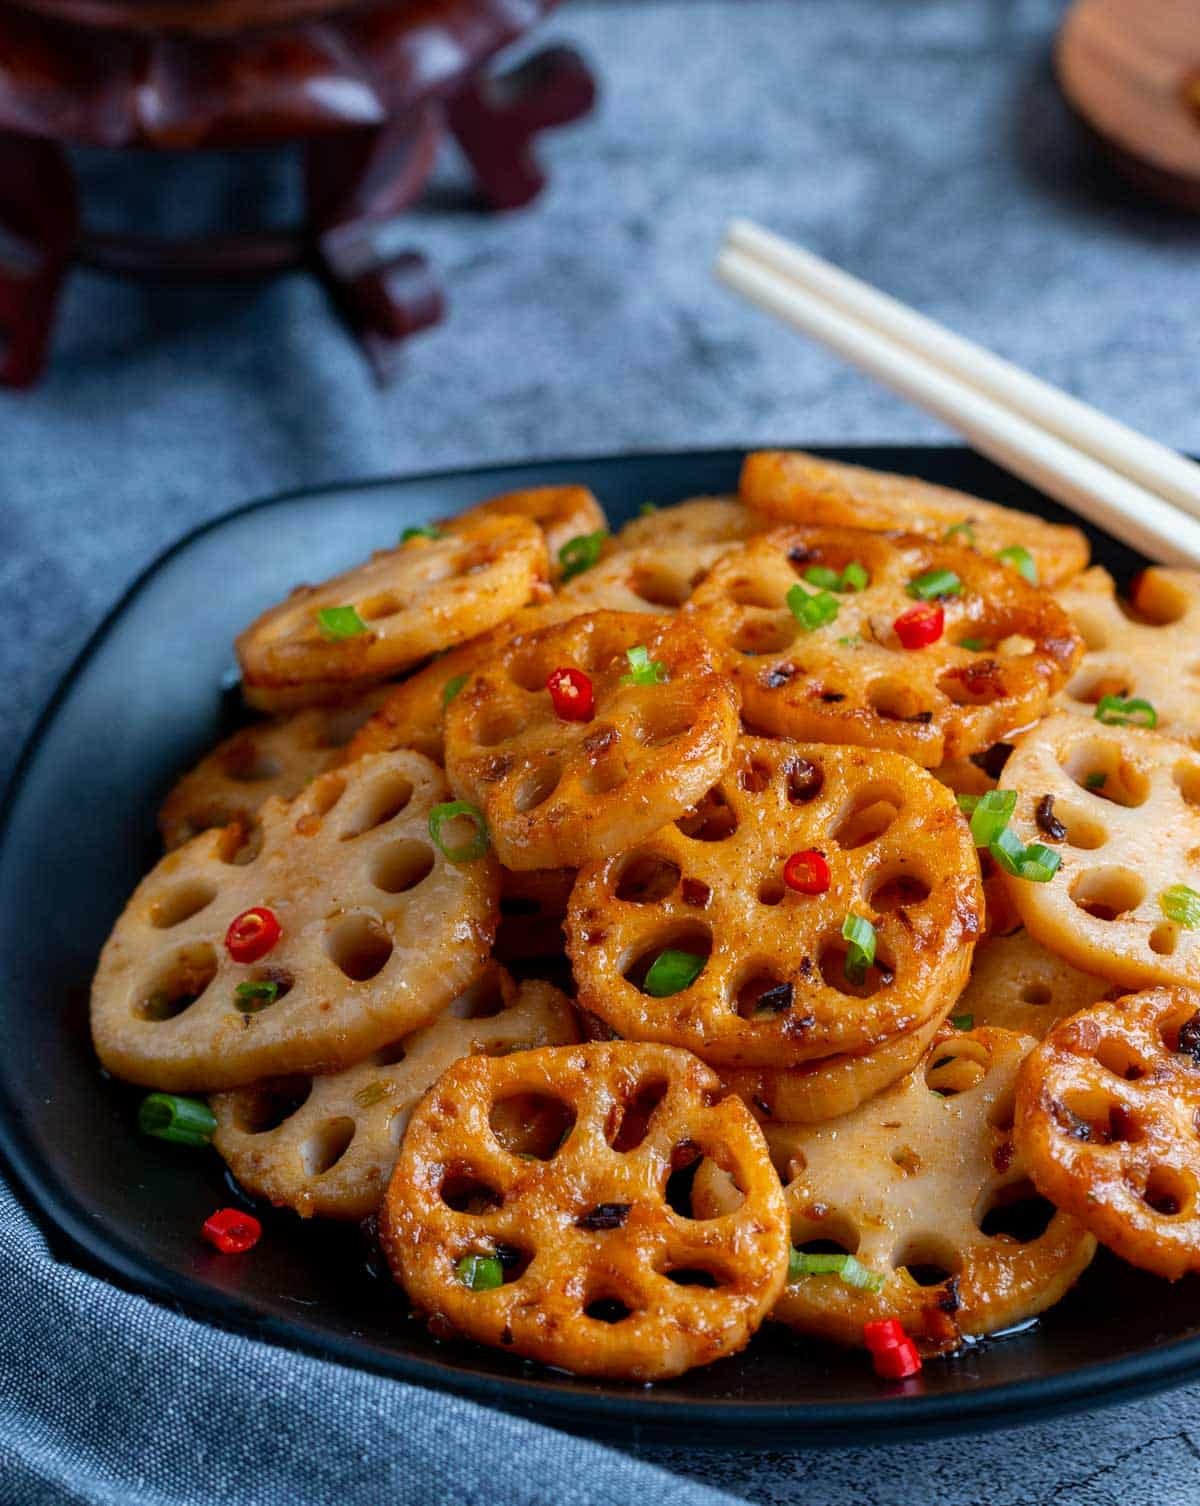 Prepared lotus root stir fry on a black plate garnished with chili and green onions.